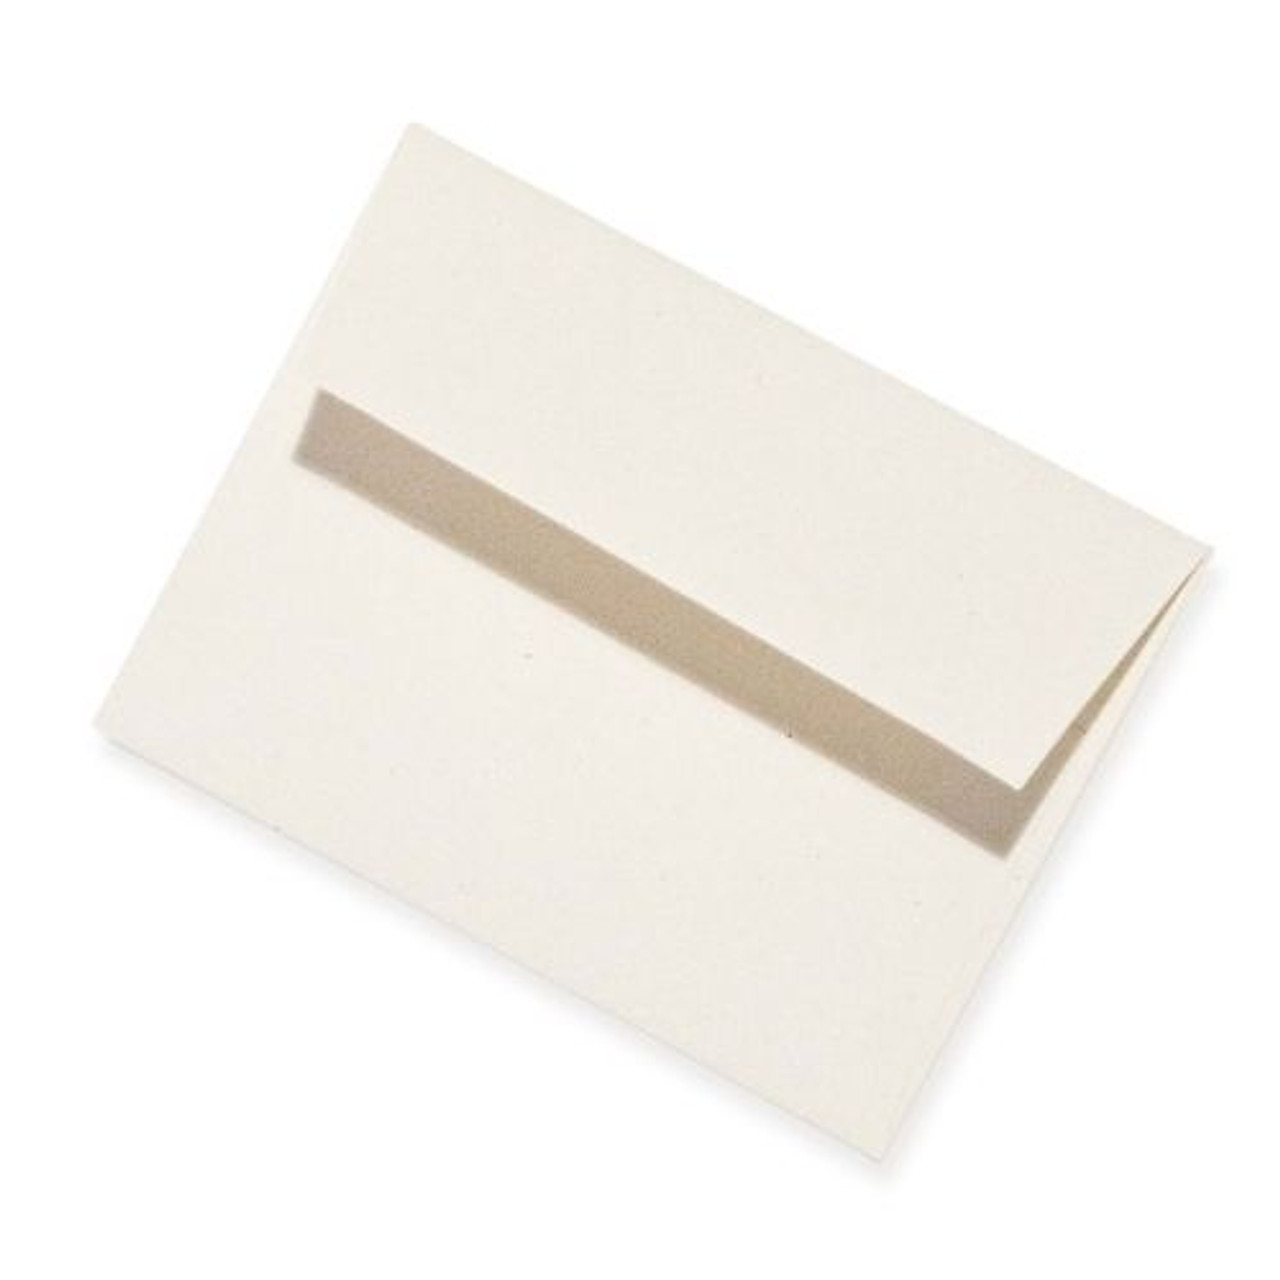 Wholesale 5 x 7 envelope For Many Packaging Needs 